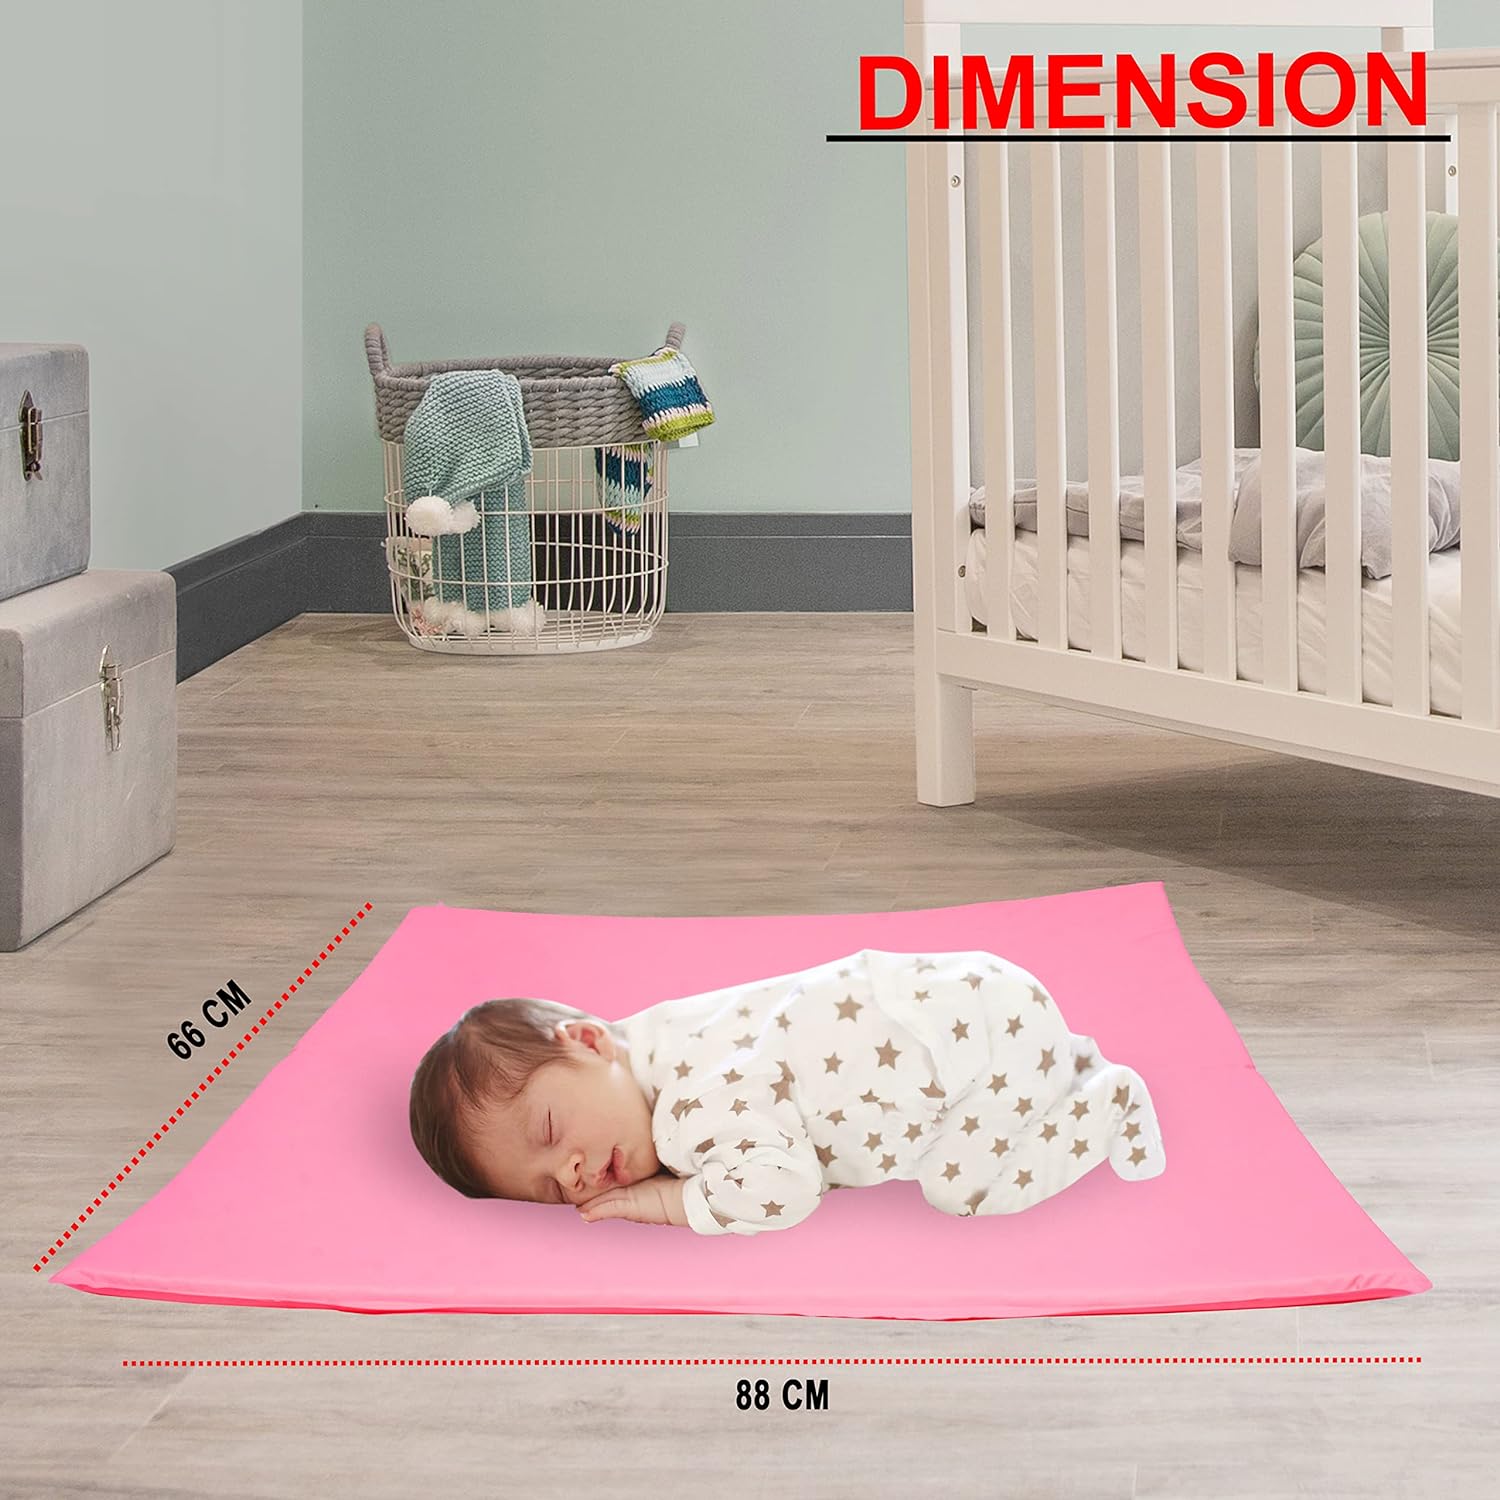 Baby Bed Protector Waterproof Plastic Urine Matress Protector/Baby Diaper Changing Soft Foam 12mm or 20mm/for 0-12 Months Baby.